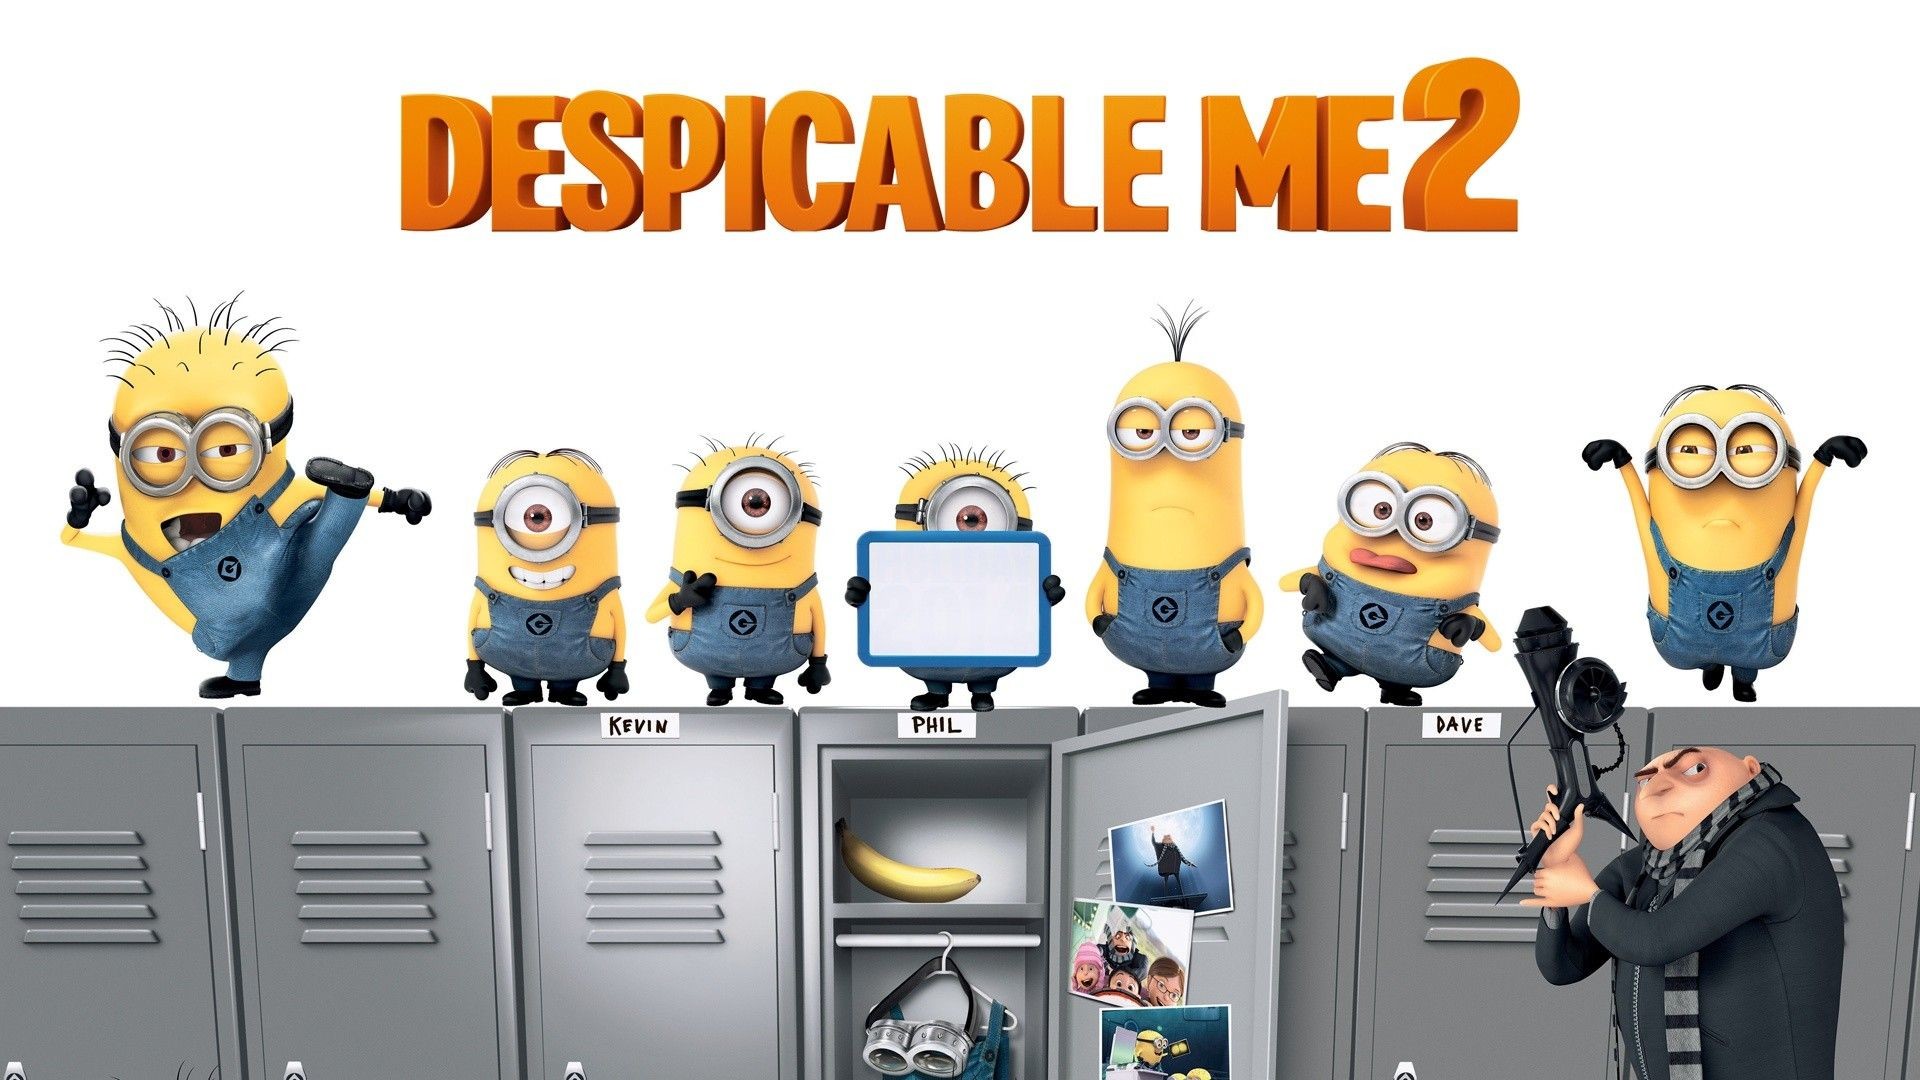 Despicable Me Minions Wallpaper For Android more info